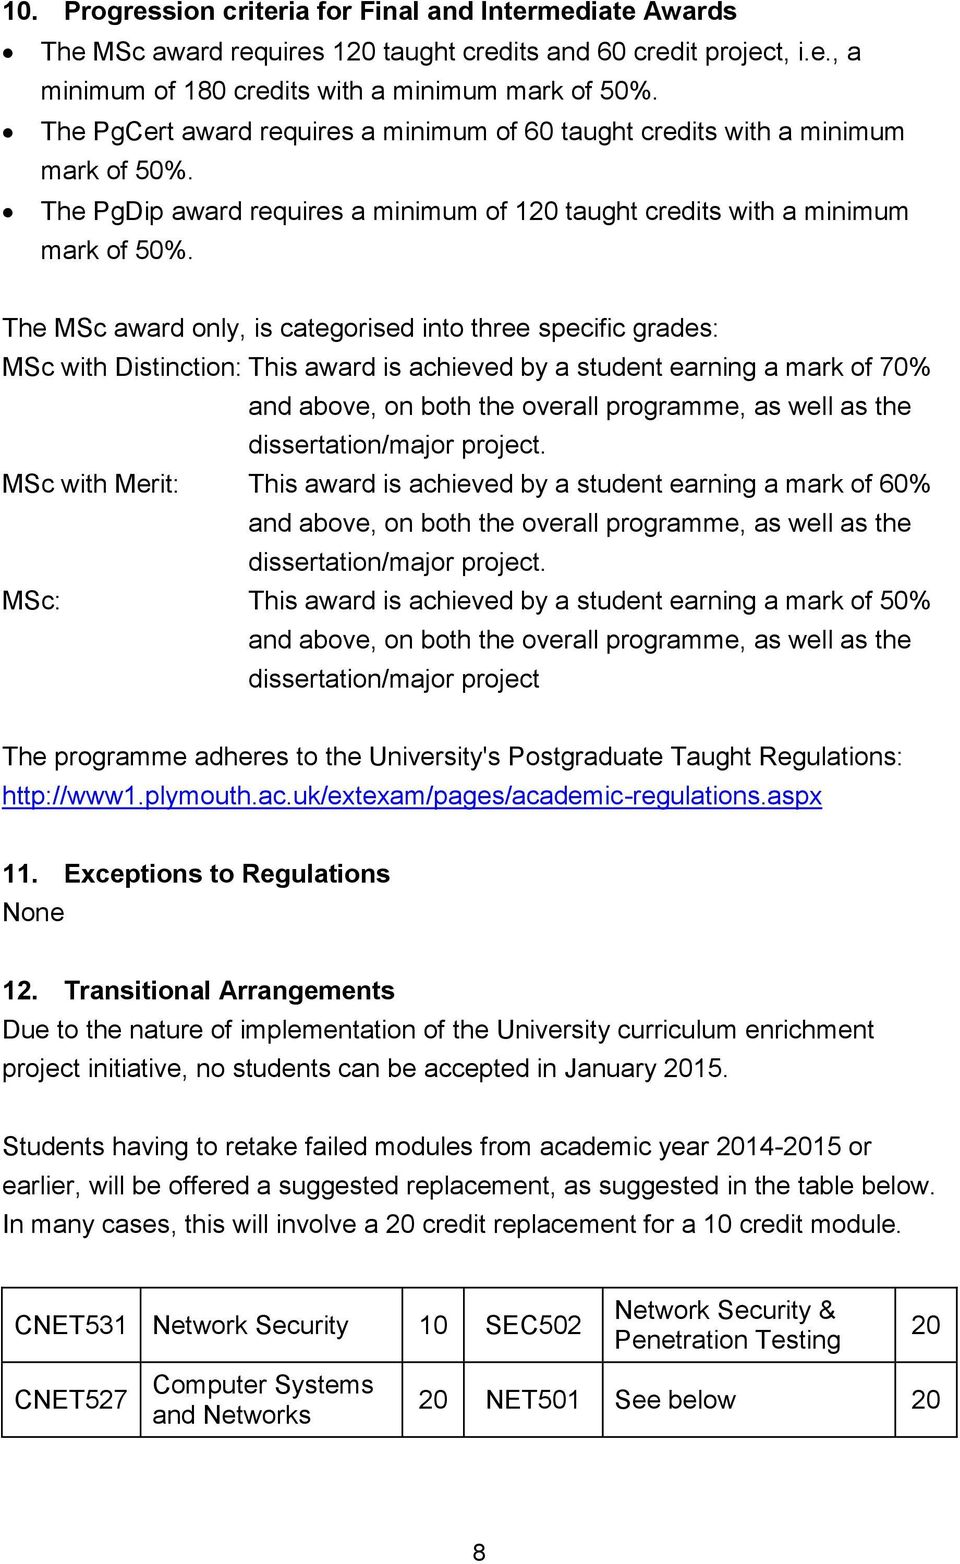 The MSc award only, is categorised into three specific grades: MSc with Distinction: This award is achieved by a student earning a mark of 70% and above, on both the overall programme, as well as the